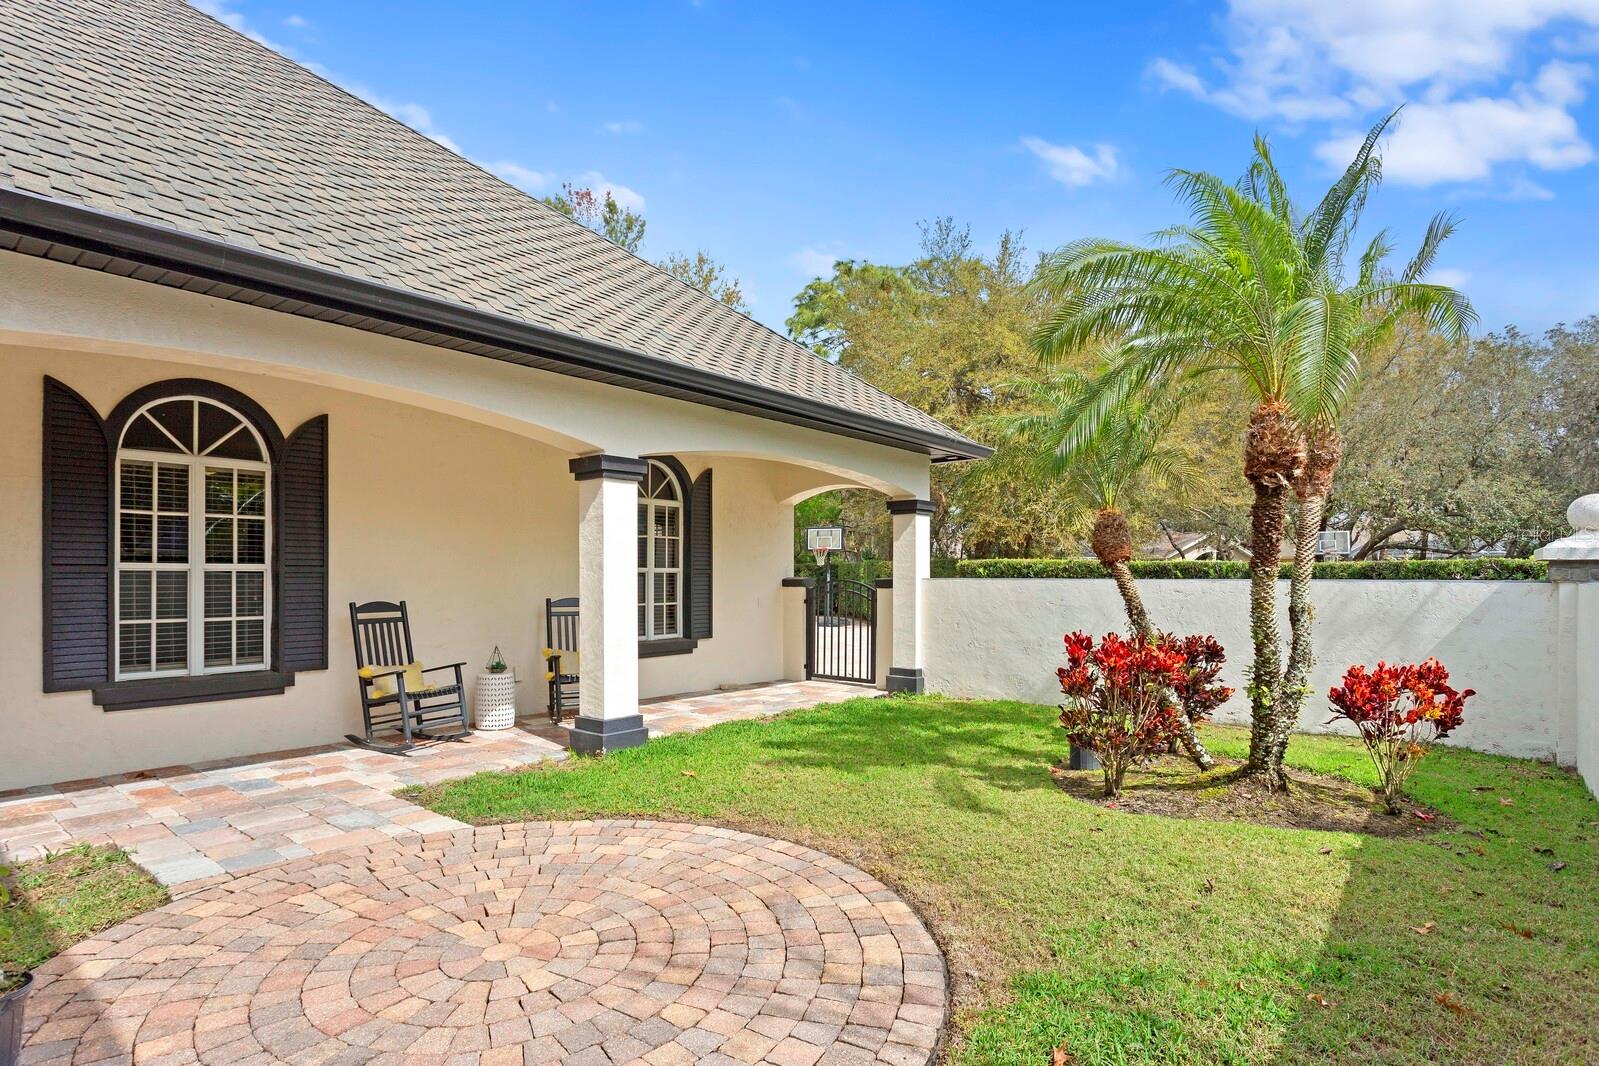 Private entrance & patio for in-law suite, this is luxury living!